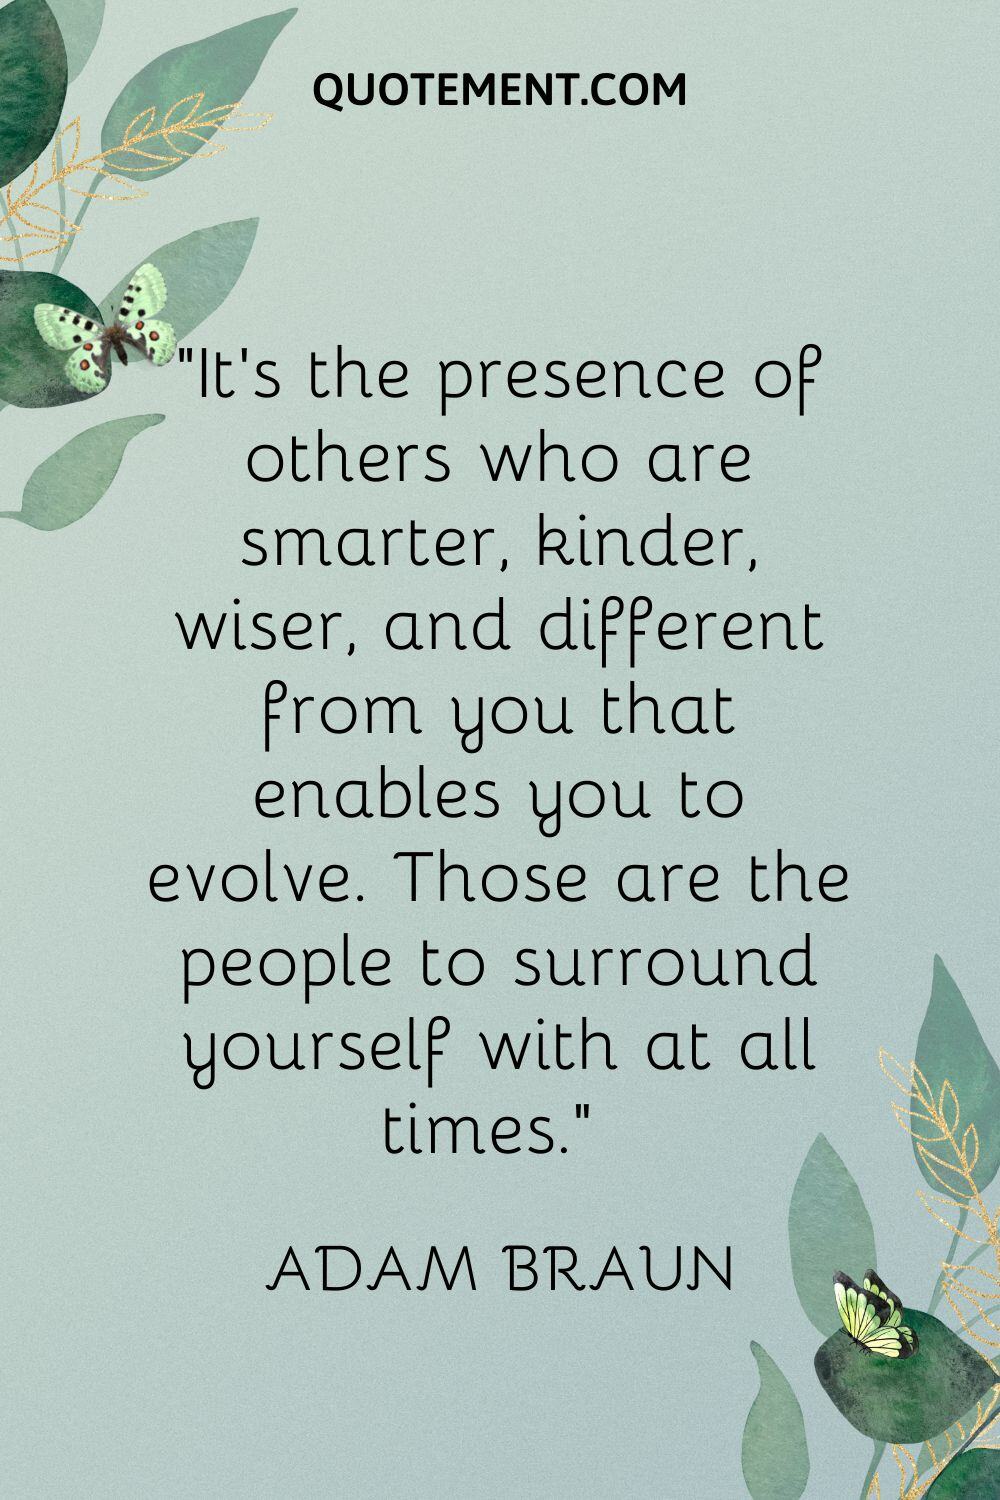 It’s the presence of others who are smarter, kinder, wiser, and different from you that enables you to evolve